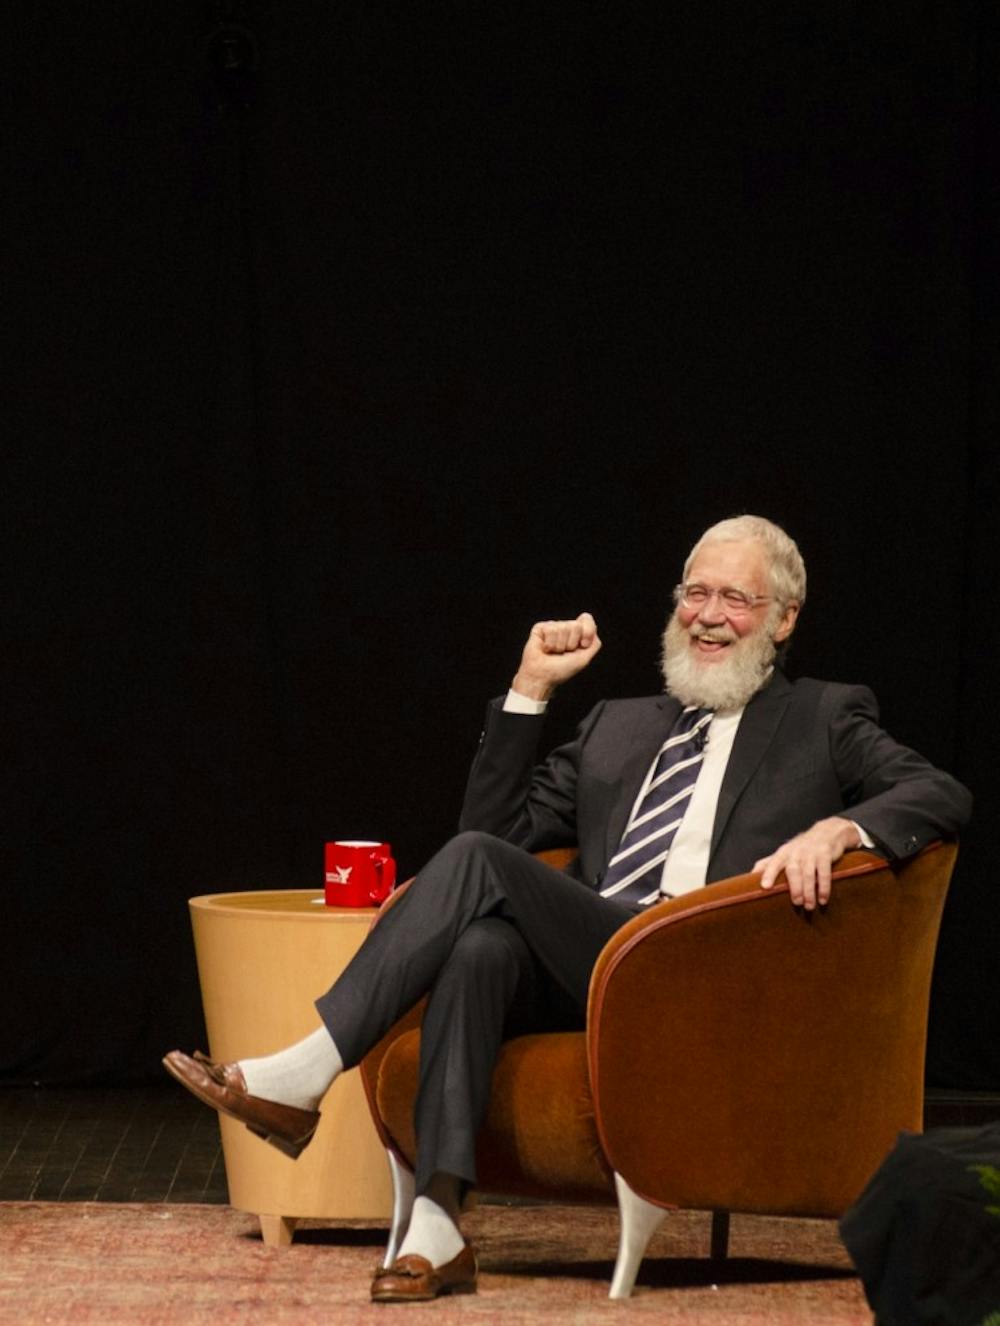 <p>Alumnus David Letterman&nbsp;came to Ball State with filmmakers Spike Jonze and Bennett Miller on Nov. 30, 2015, at John R. Emens Auditorium. Recently, the famous talk show host has donated over 1,000 items of memorabilia to the university. <strong>Breanna Daugherty, DN File</strong></p>